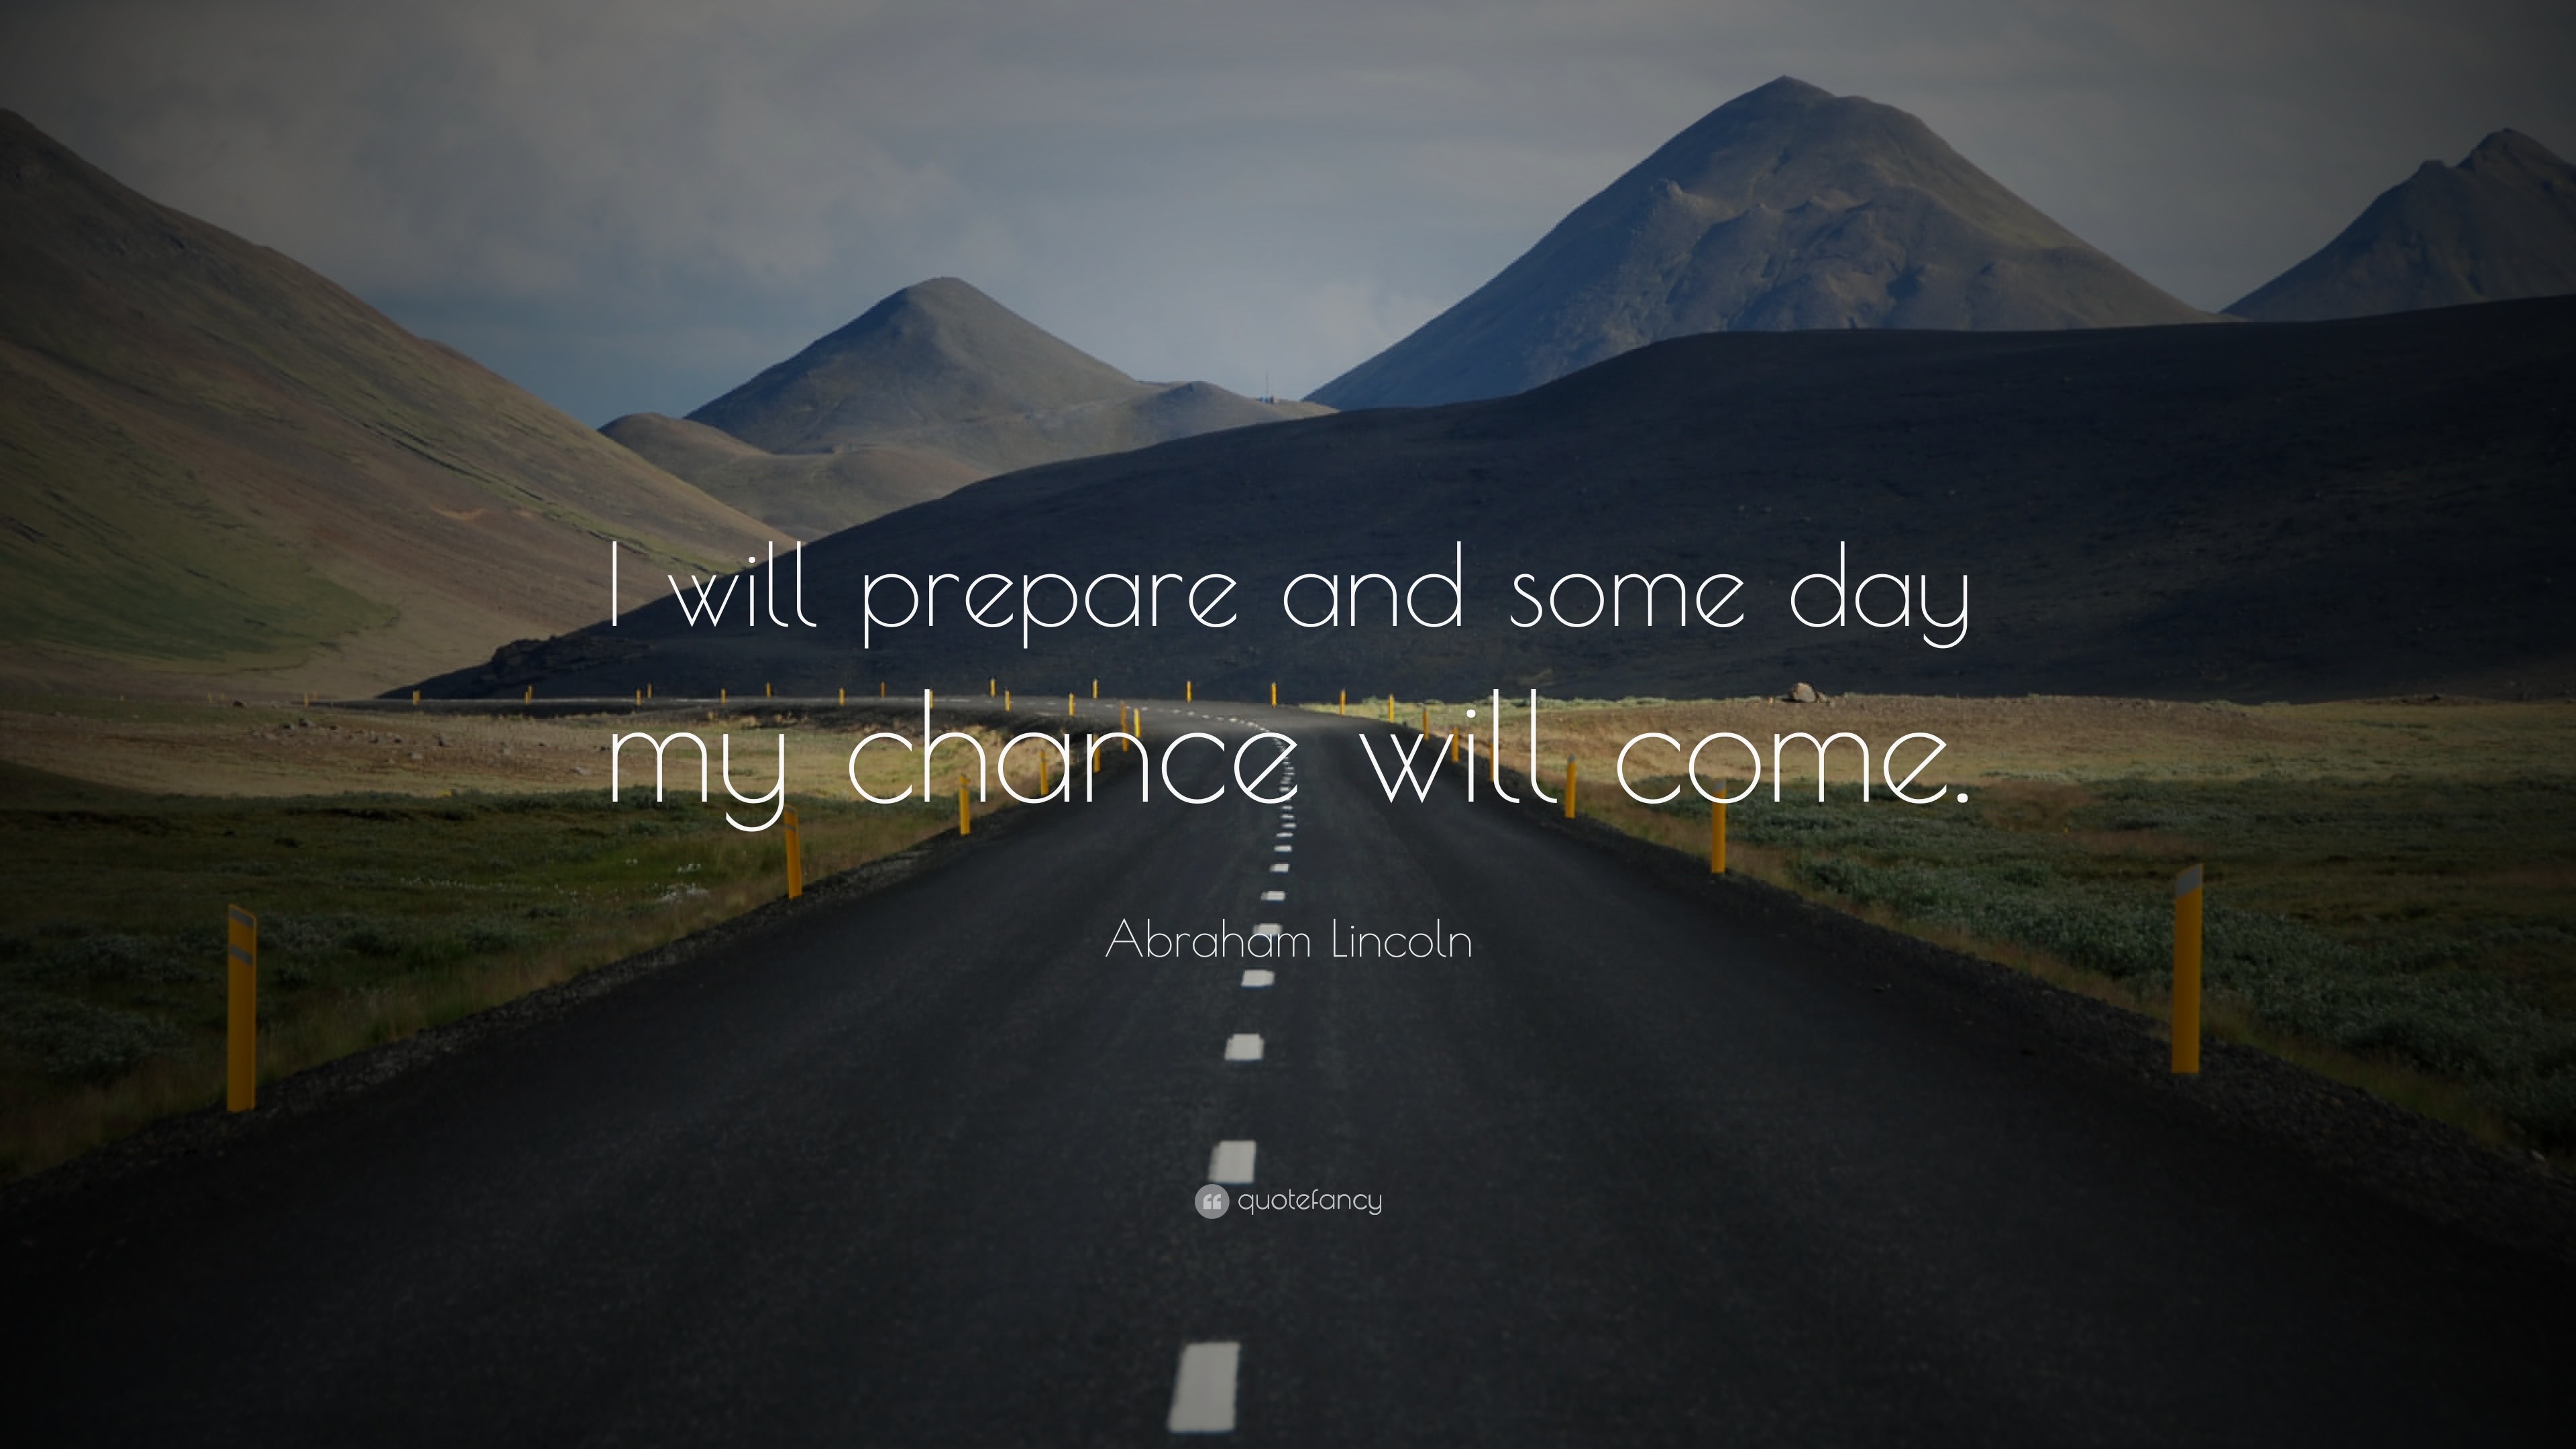 3840x2160 Abraham Lincoln Quote: “I will prepare and some day my chance will come.